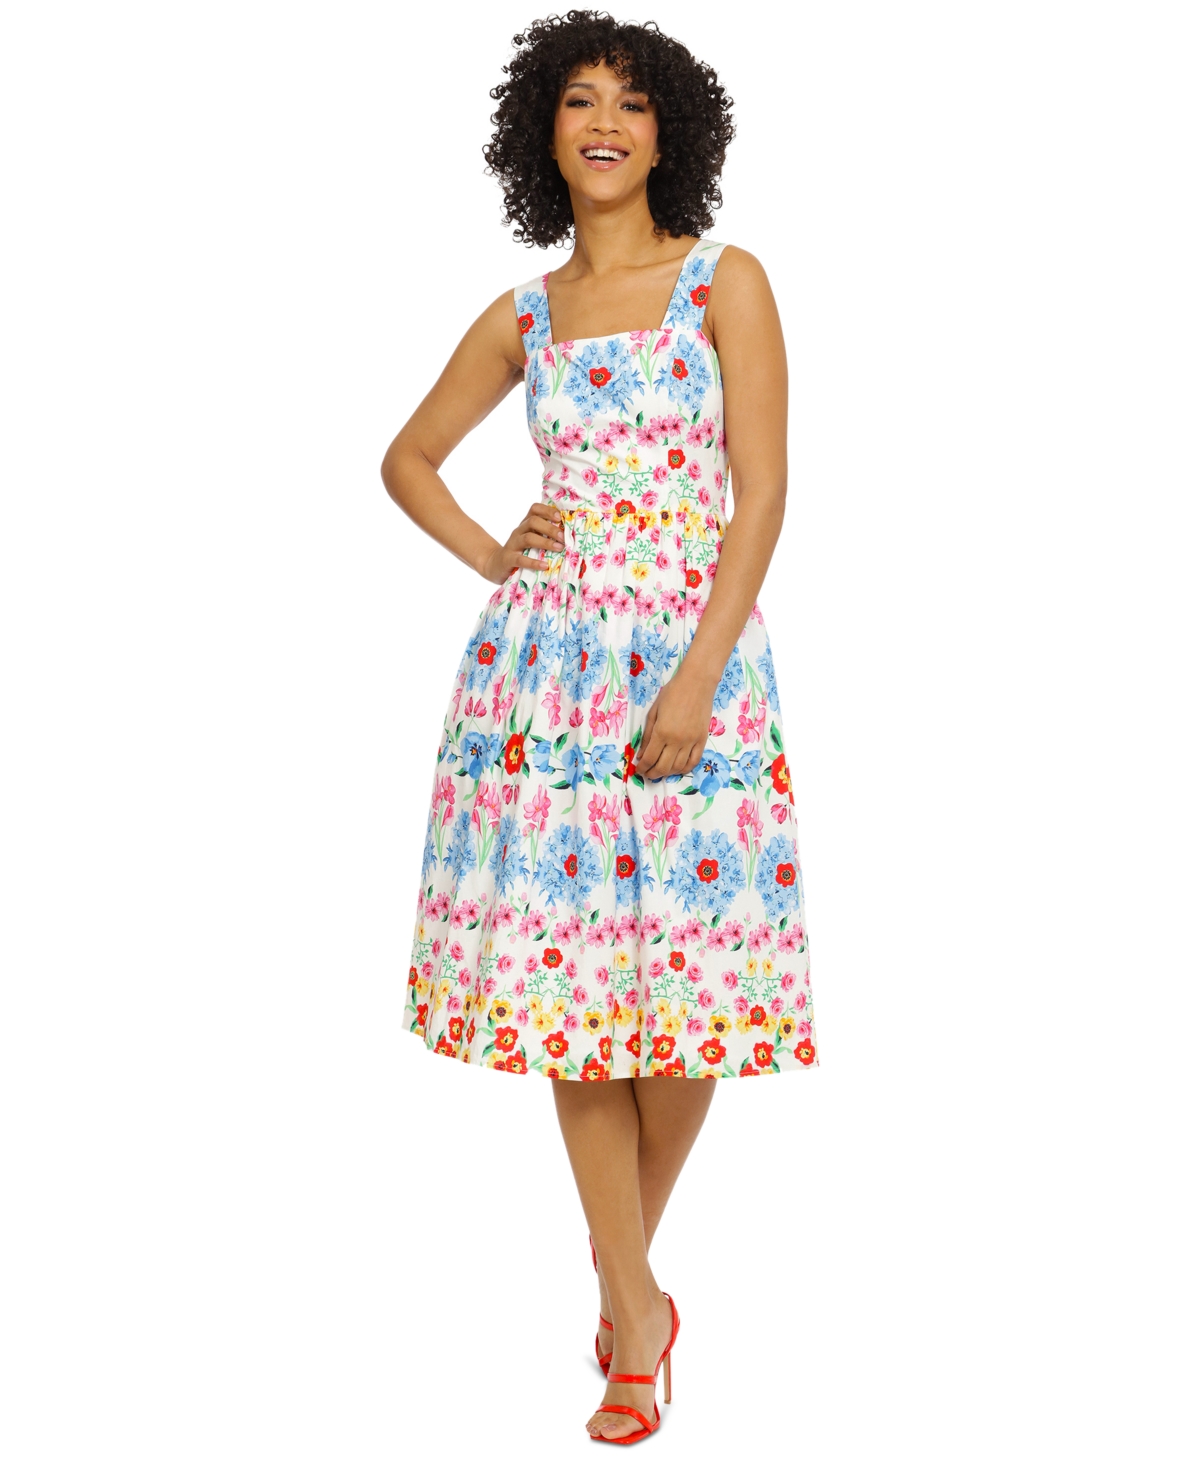 Women's Floral-Print Fit & Flare Dress - Soft White/bluebell